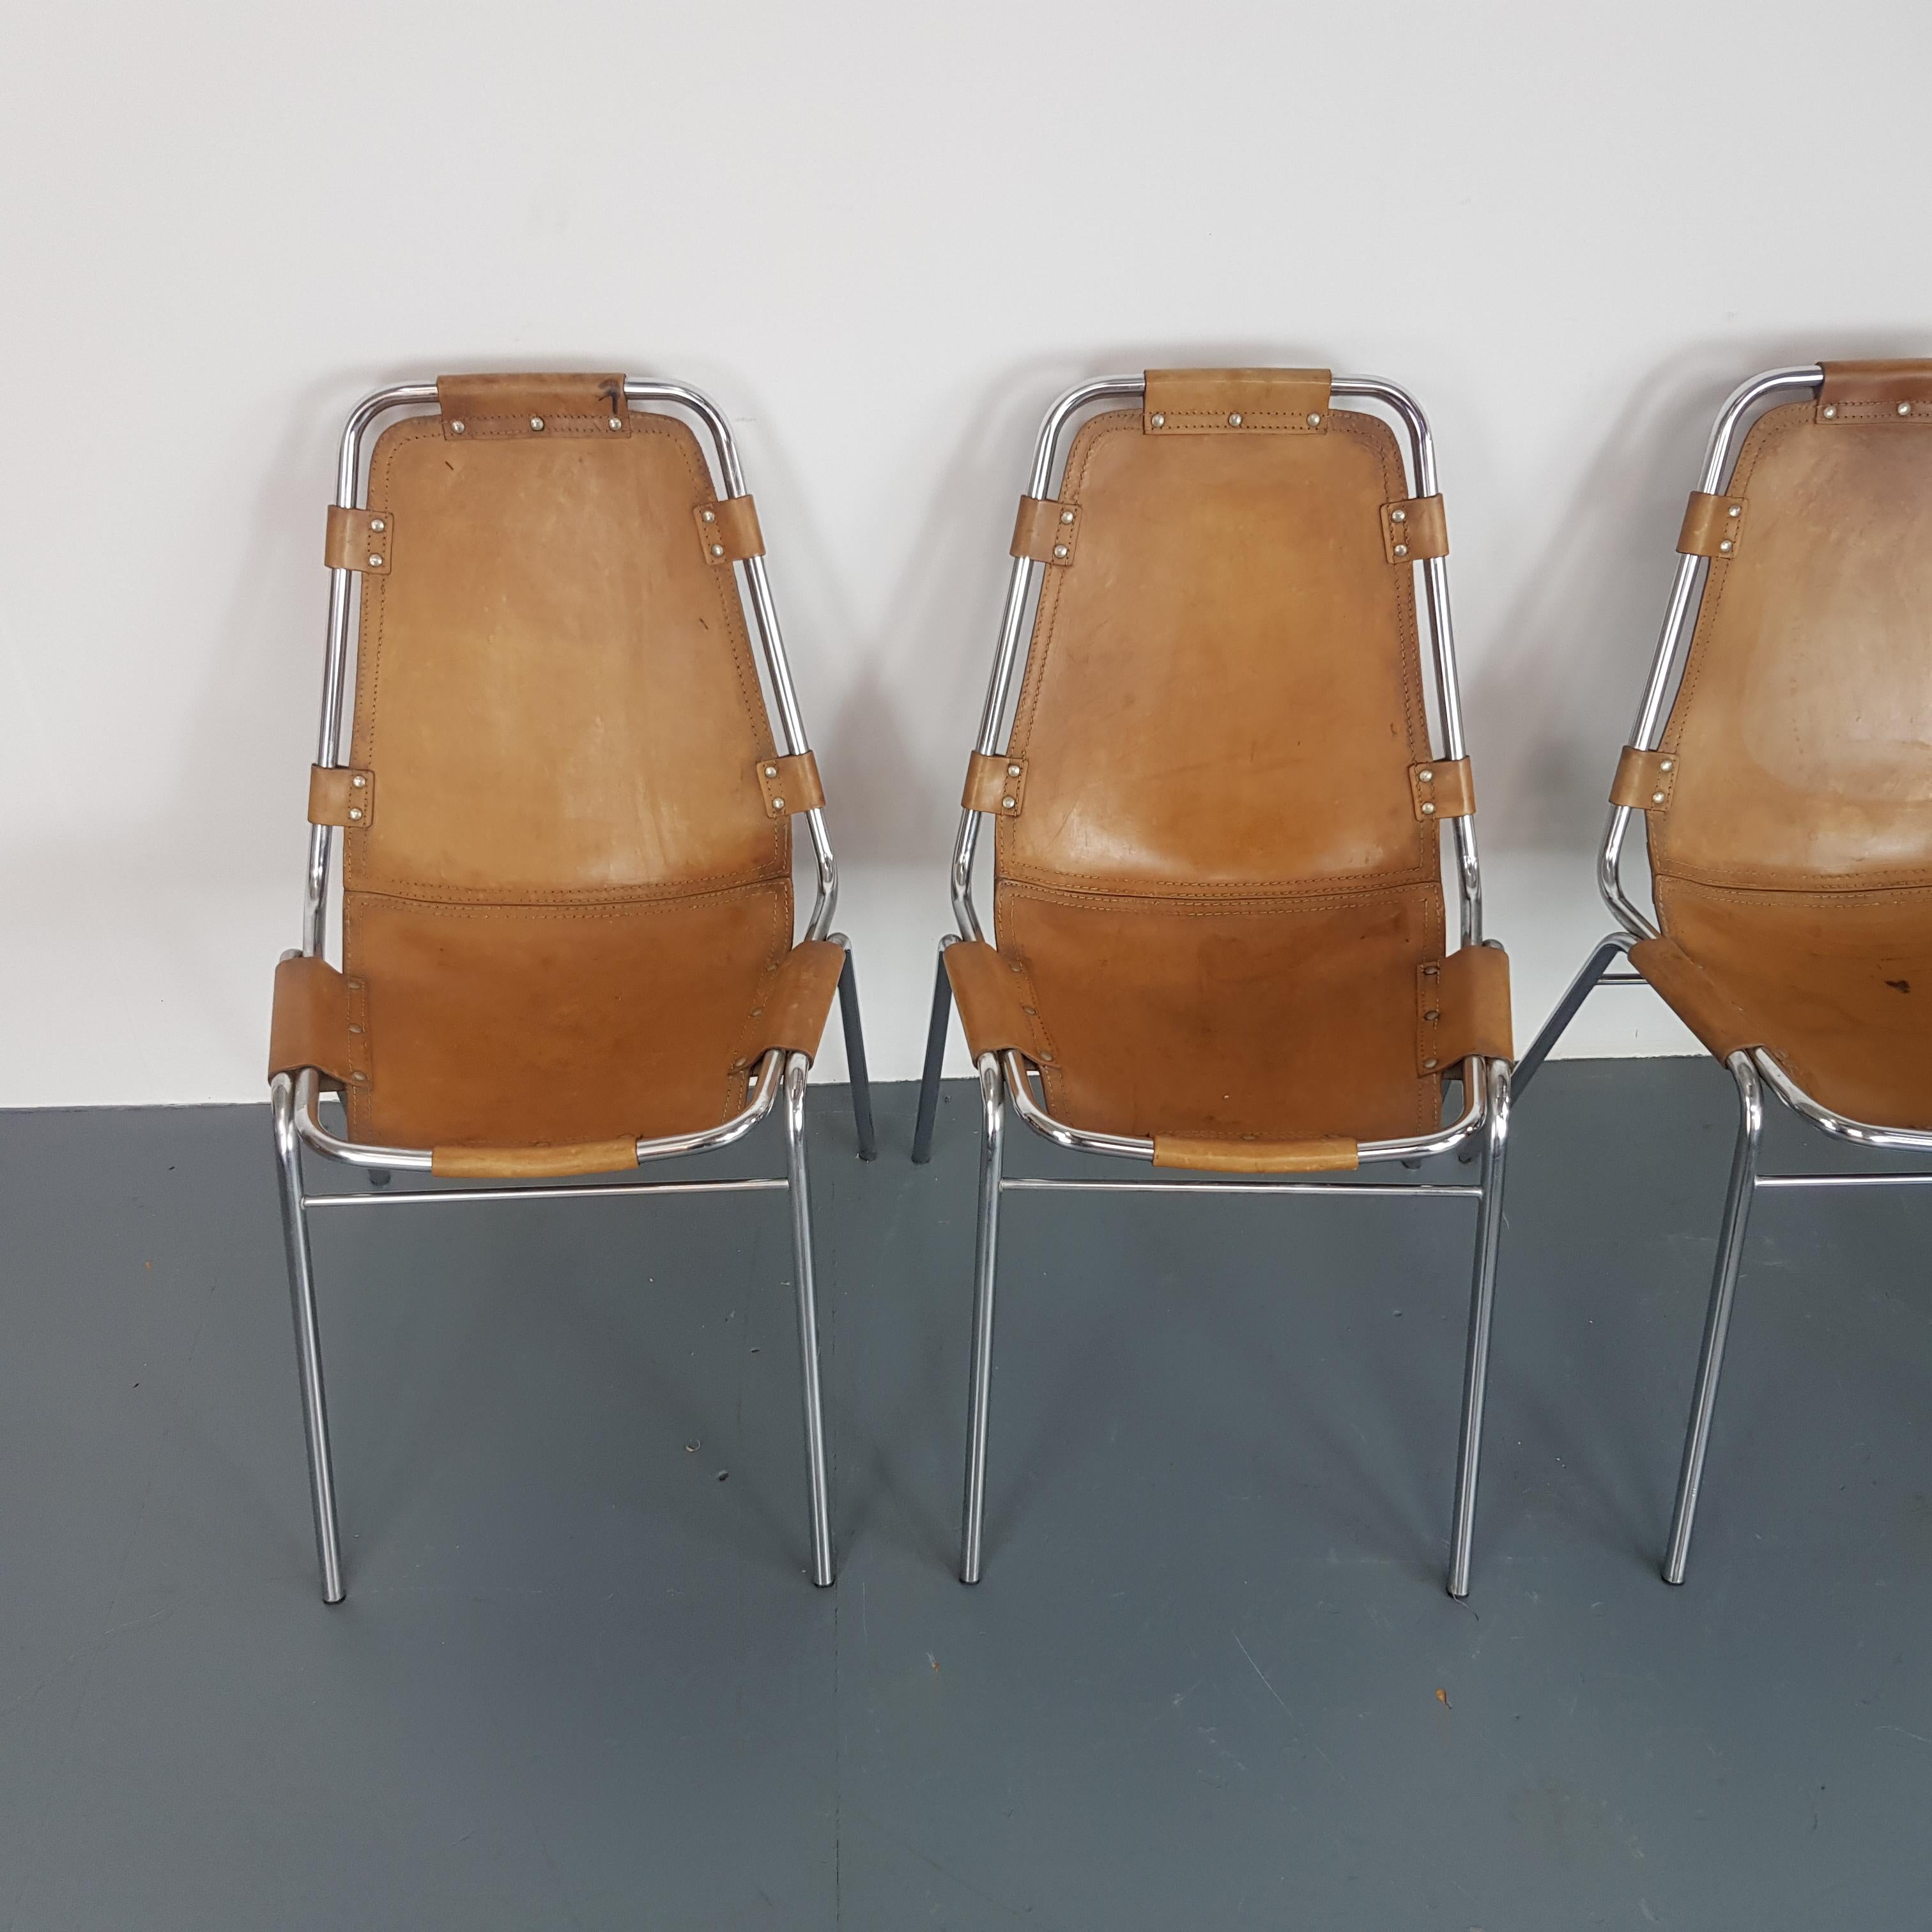 Gorgeous 1970s set of 4 Les Arcs chair date stamped 1972.

French architect and designer, Charlotte Perriand, 